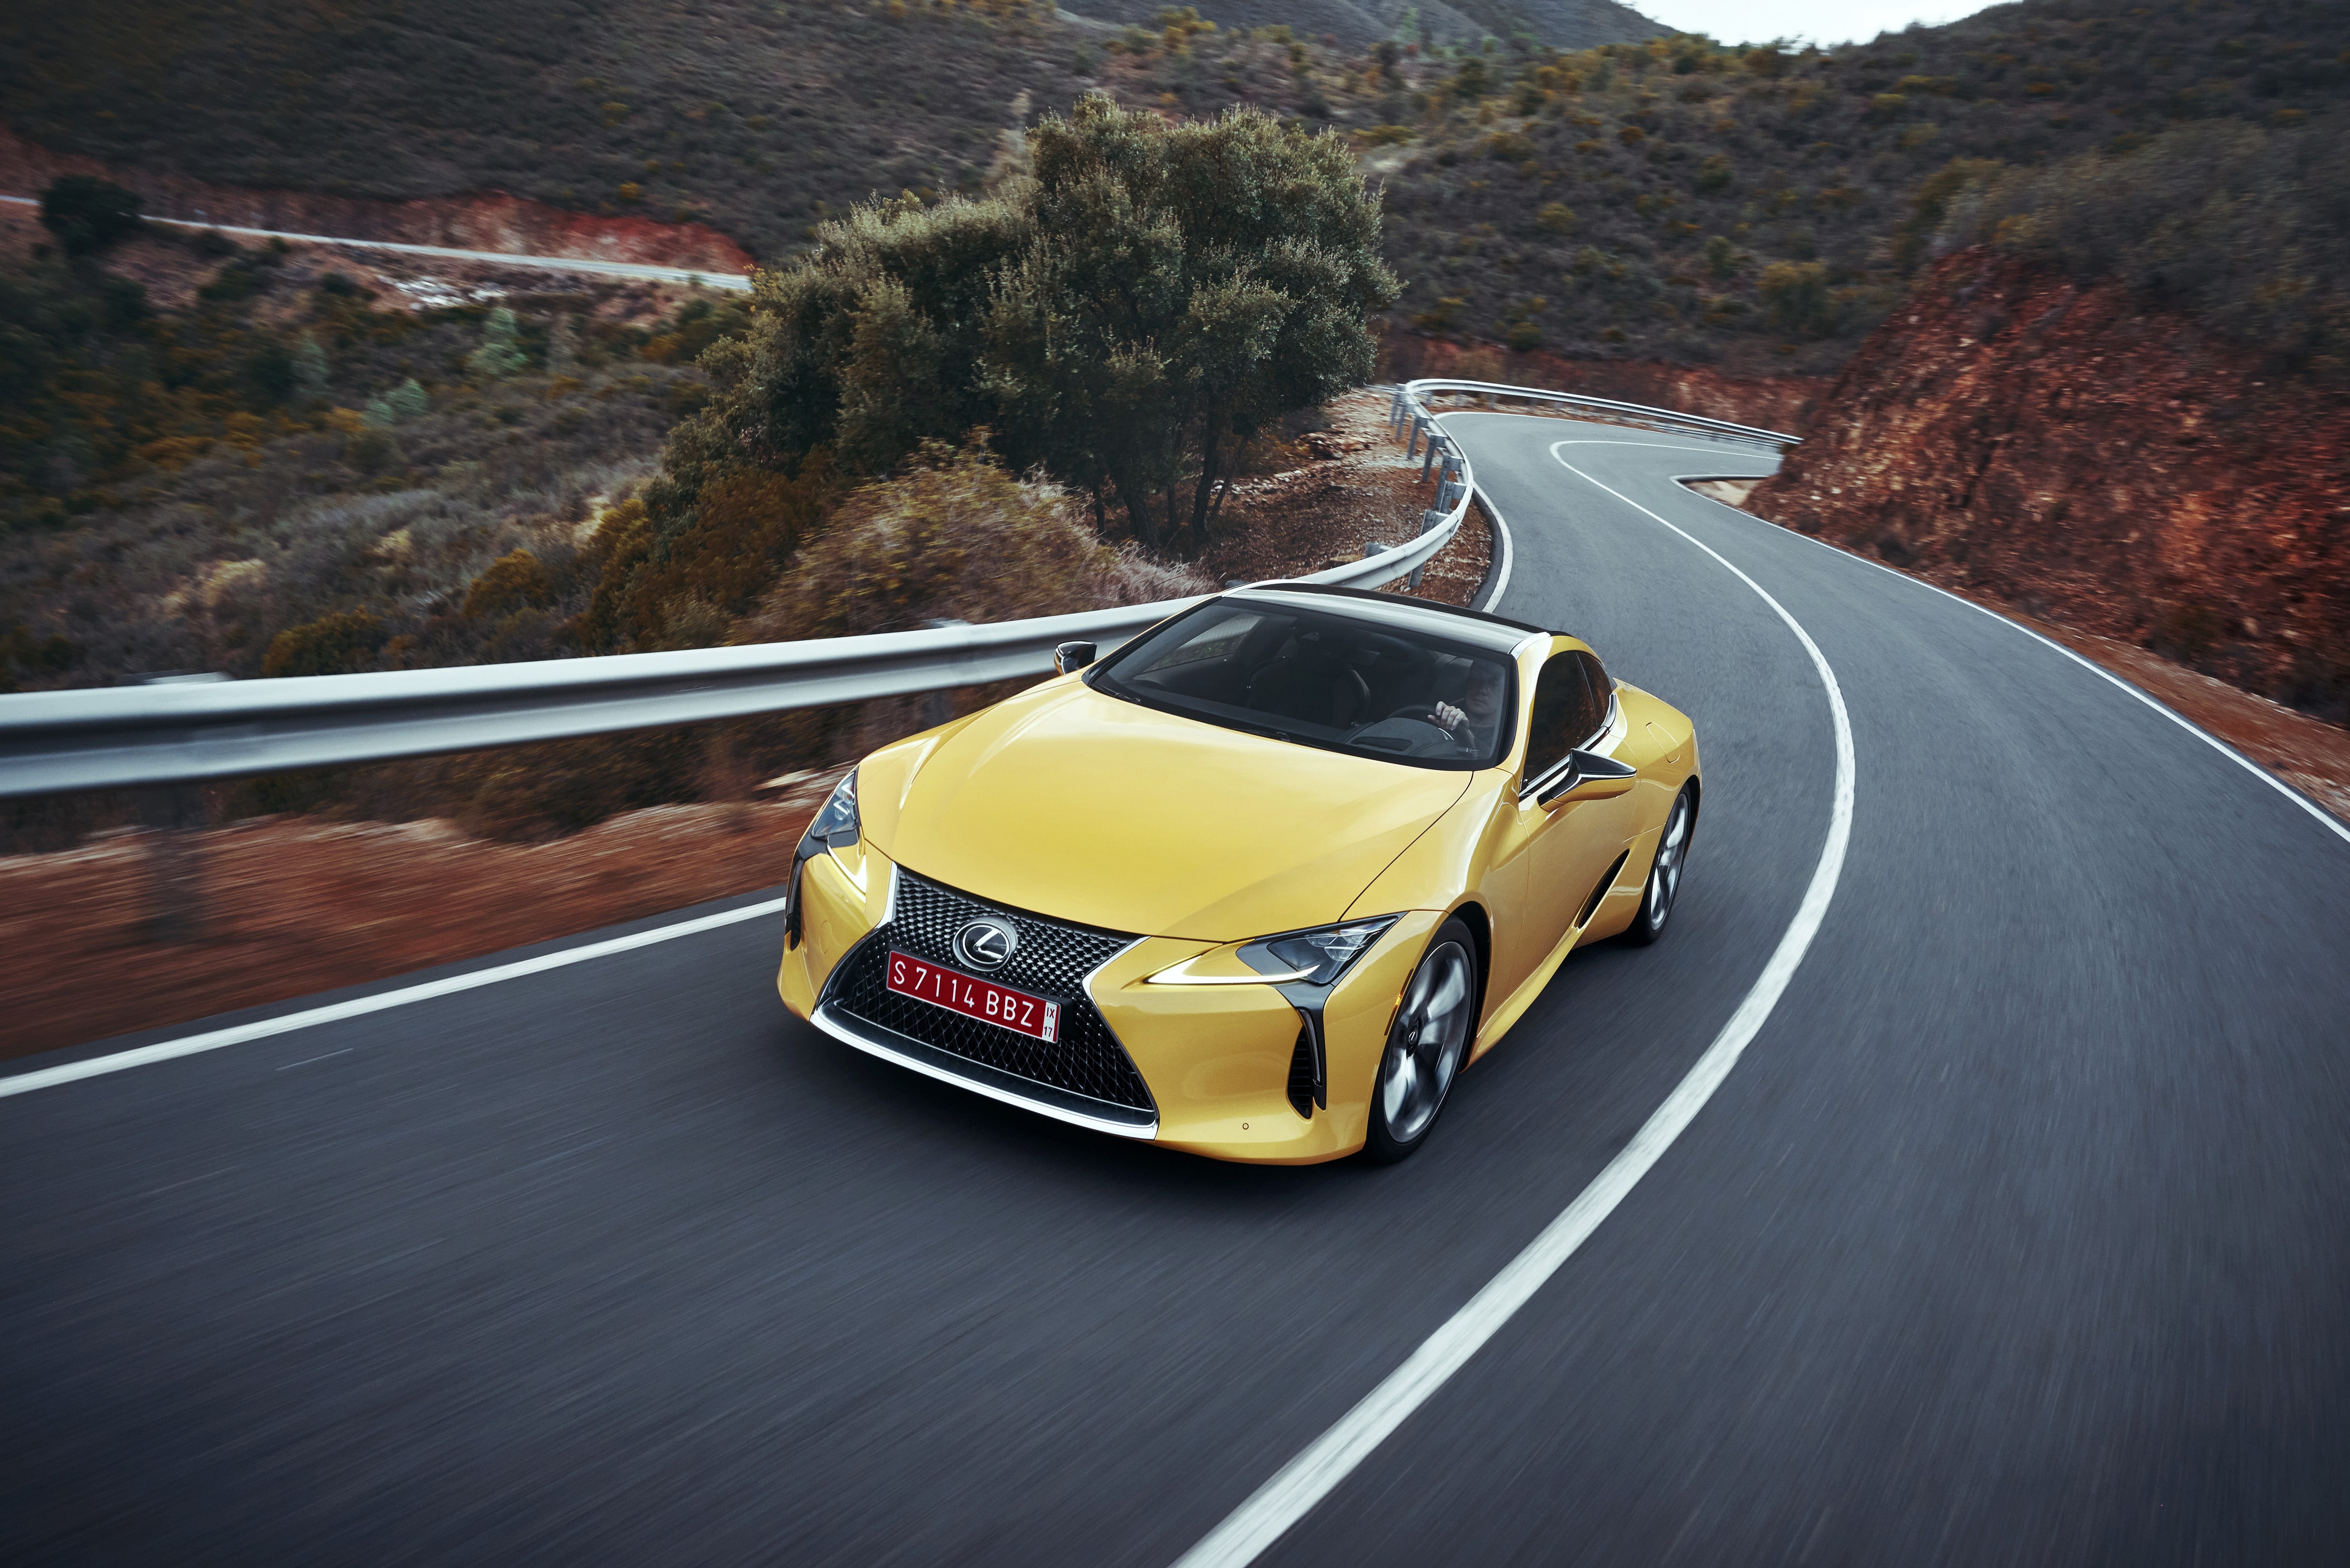 Free photo A yellow lexus lc 500 on a country road.